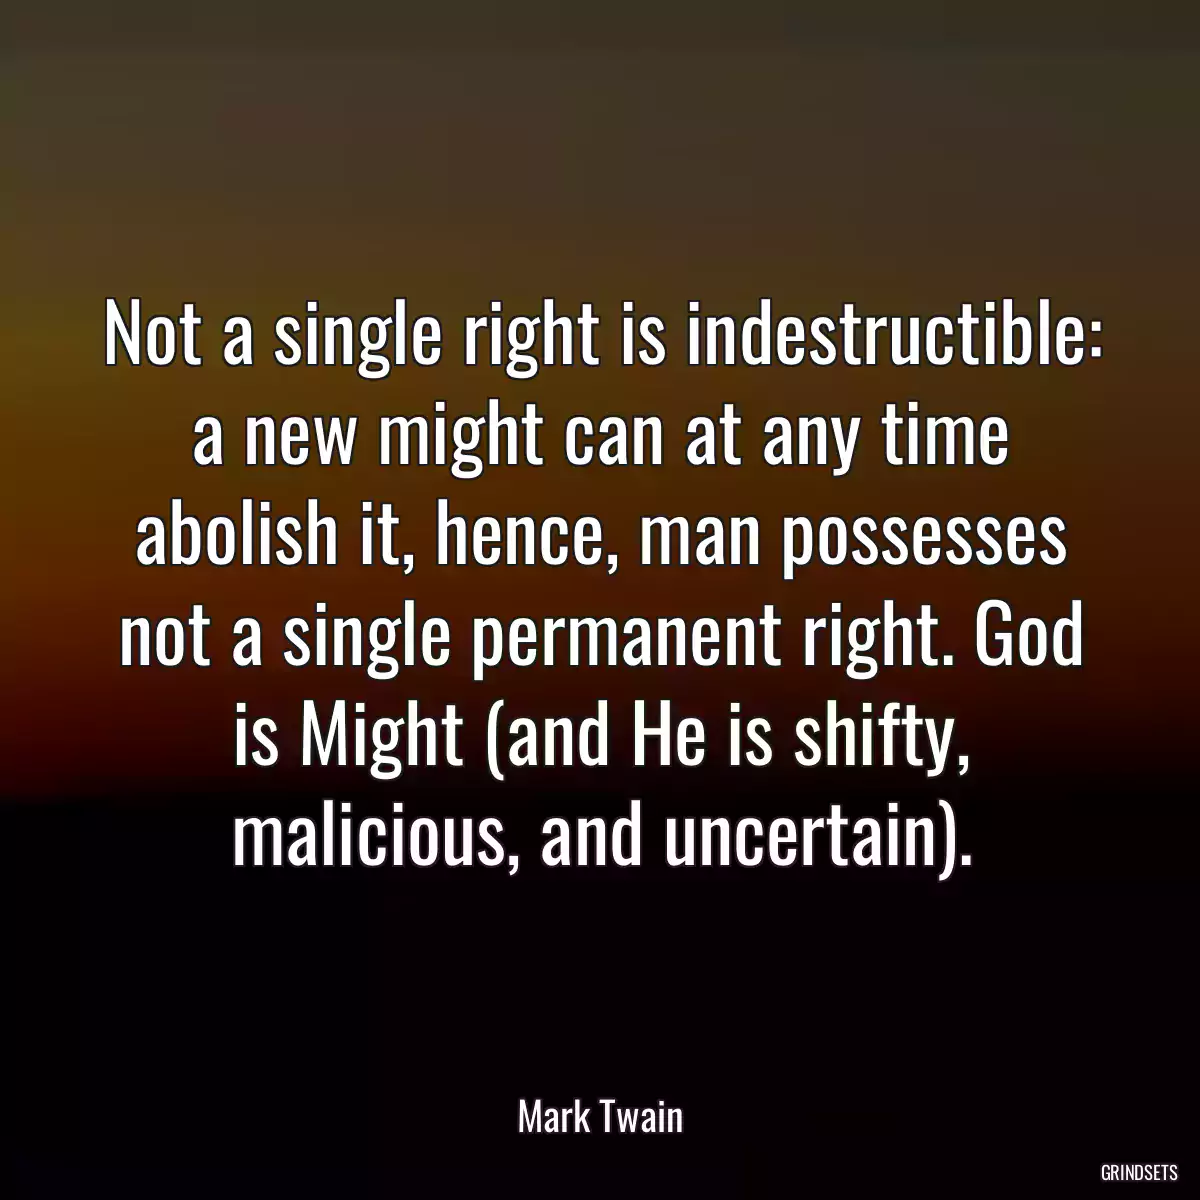 Not a single right is indestructible: a new might can at any time abolish it, hence, man possesses not a single permanent right. God is Might (and He is shifty, malicious, and uncertain).